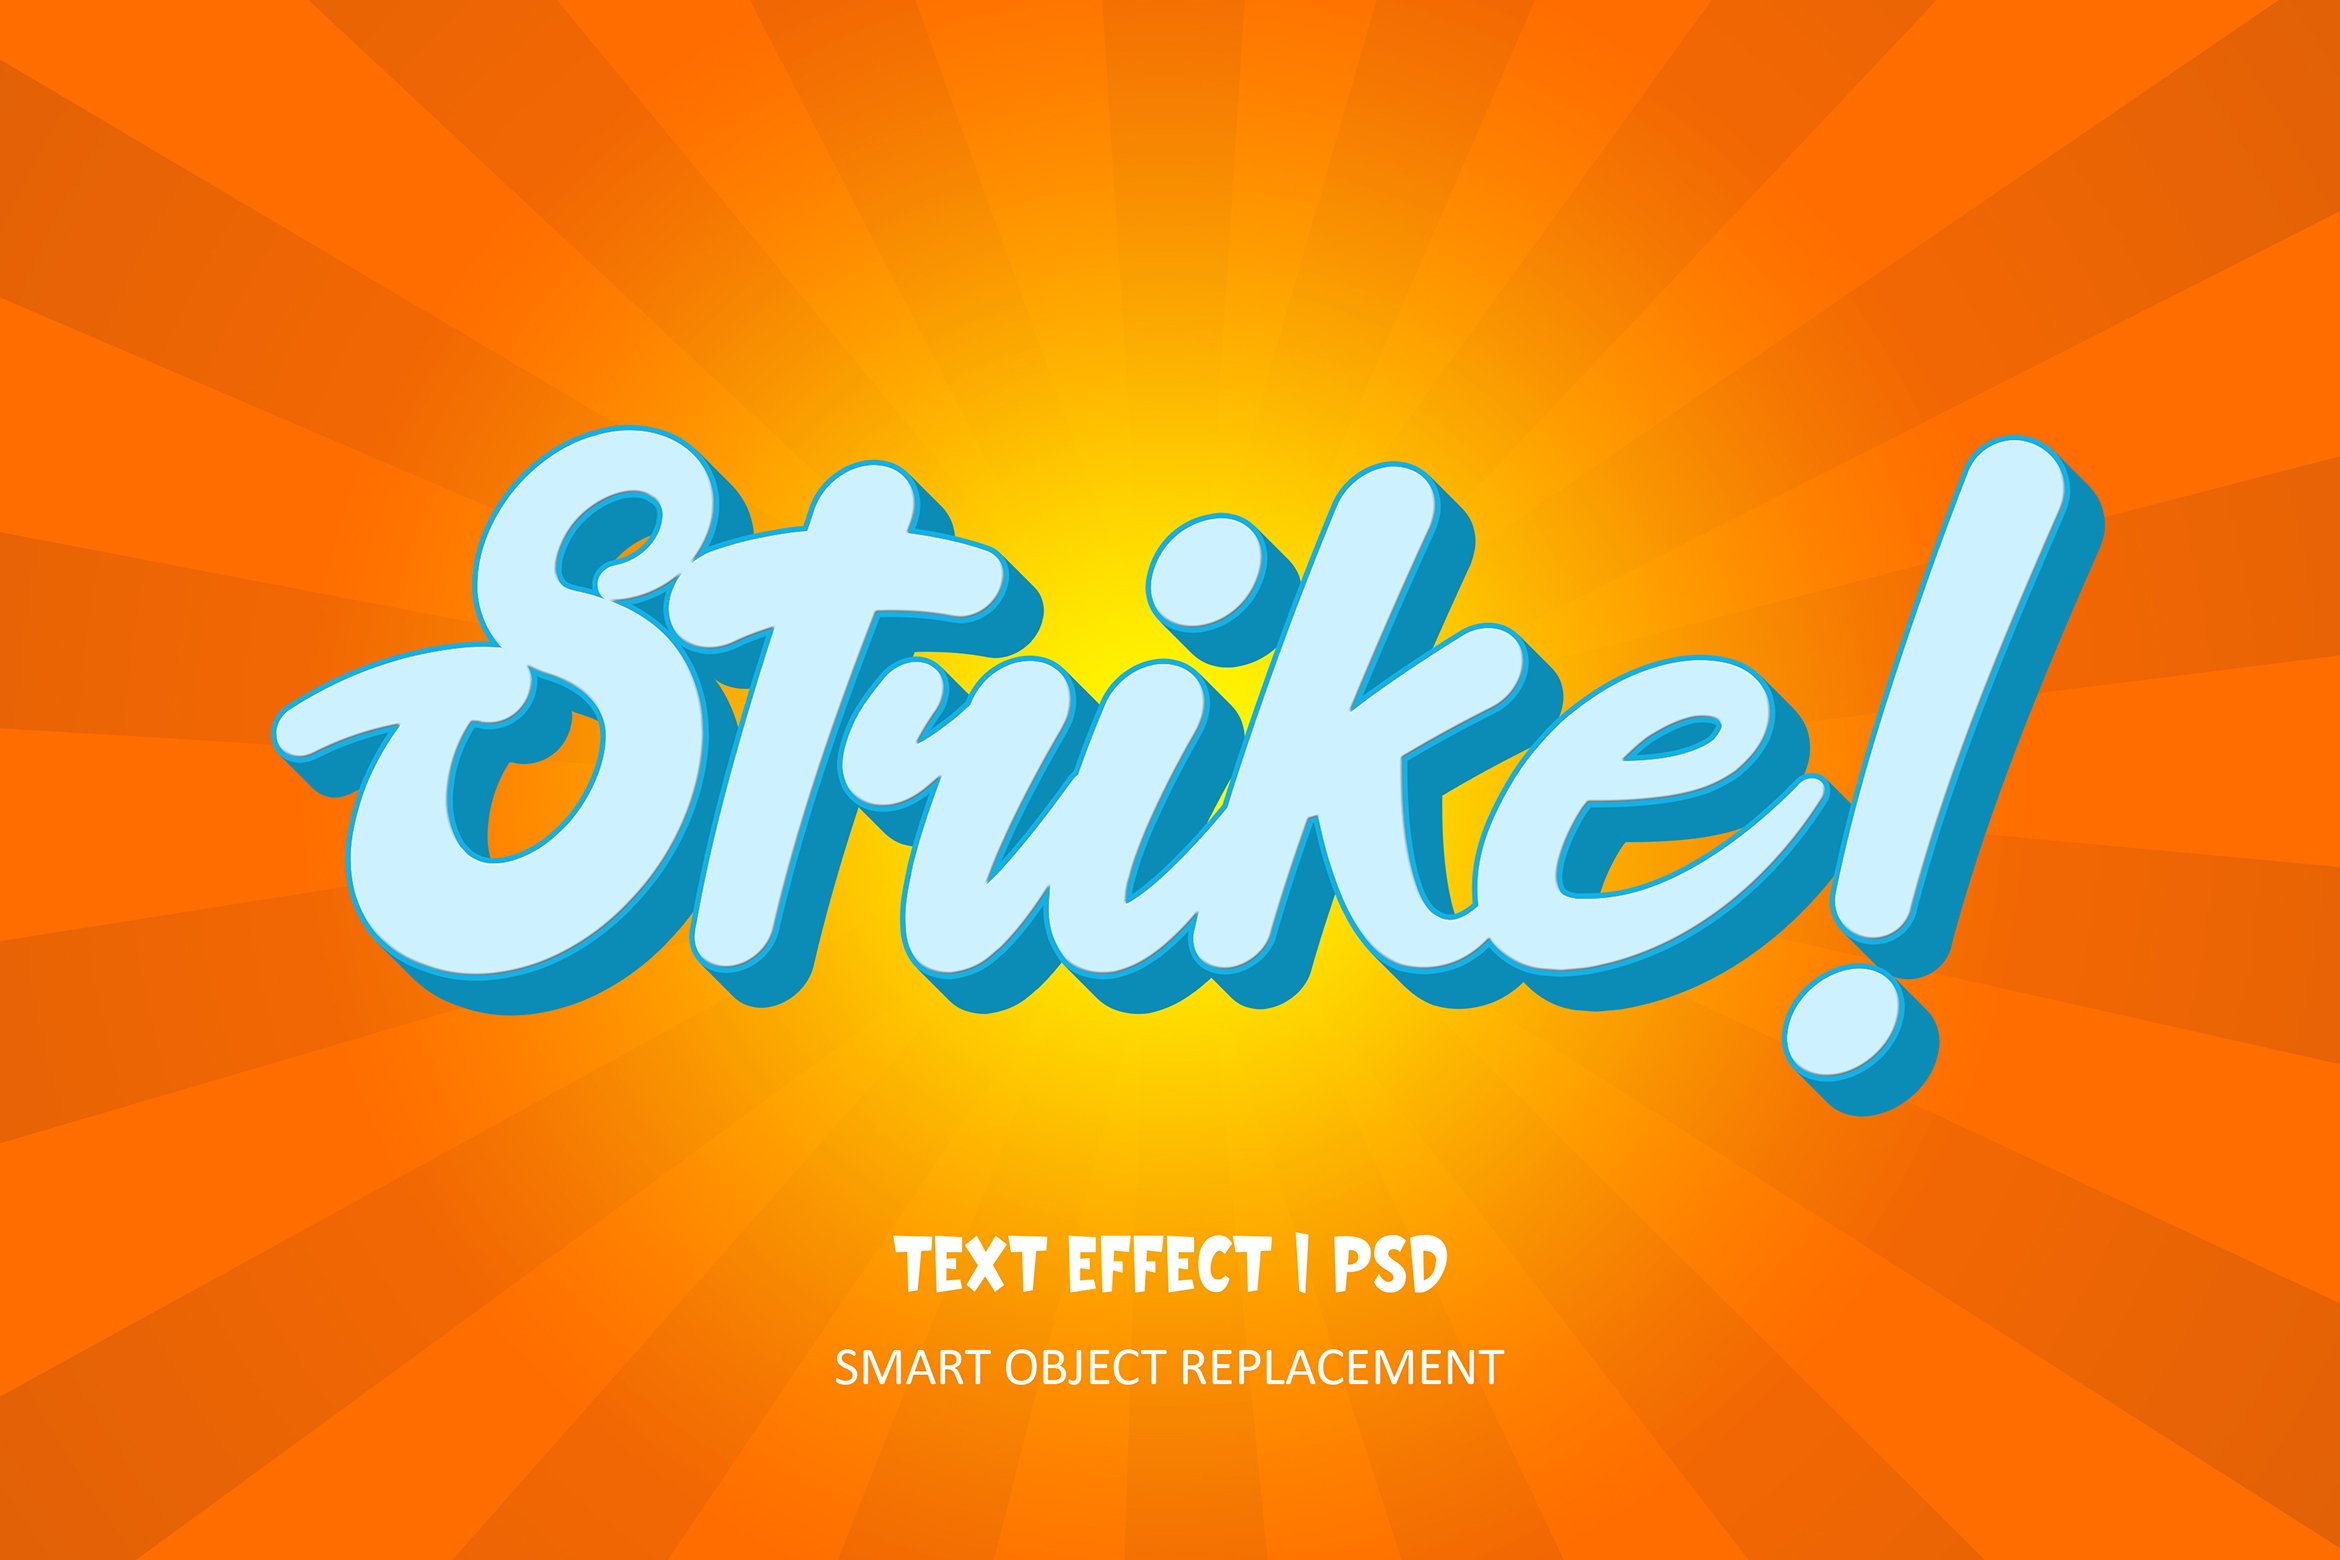 Strike Text Effect Psdcover image.